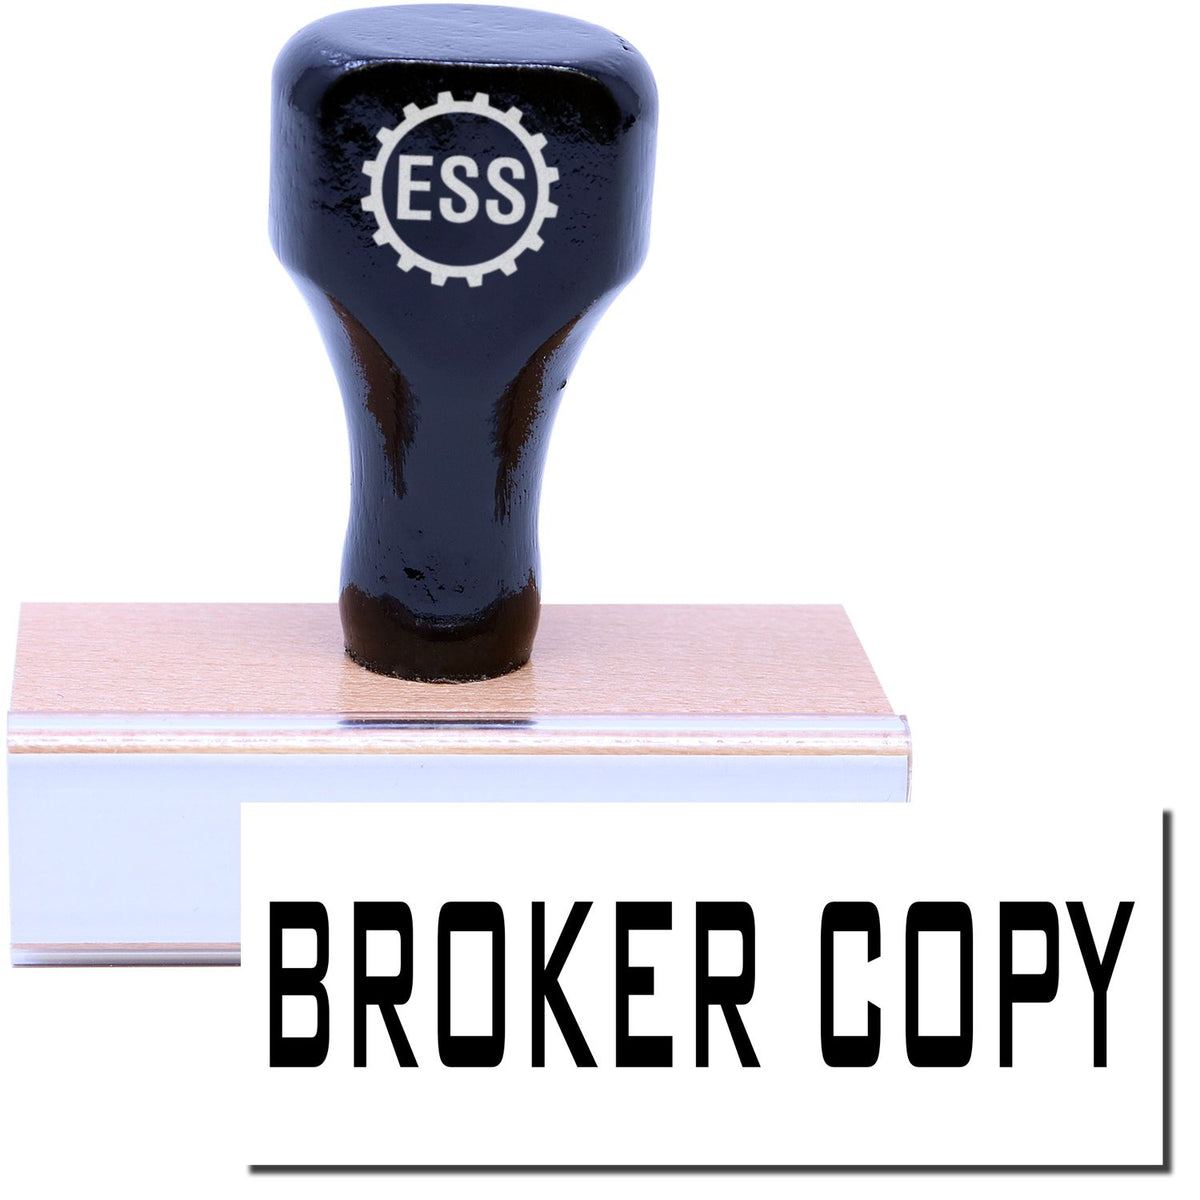 A stock office rubber stamp with a stamped image showing how the text &quot;BROKER COPY&quot; in a large font is displayed after stamping.